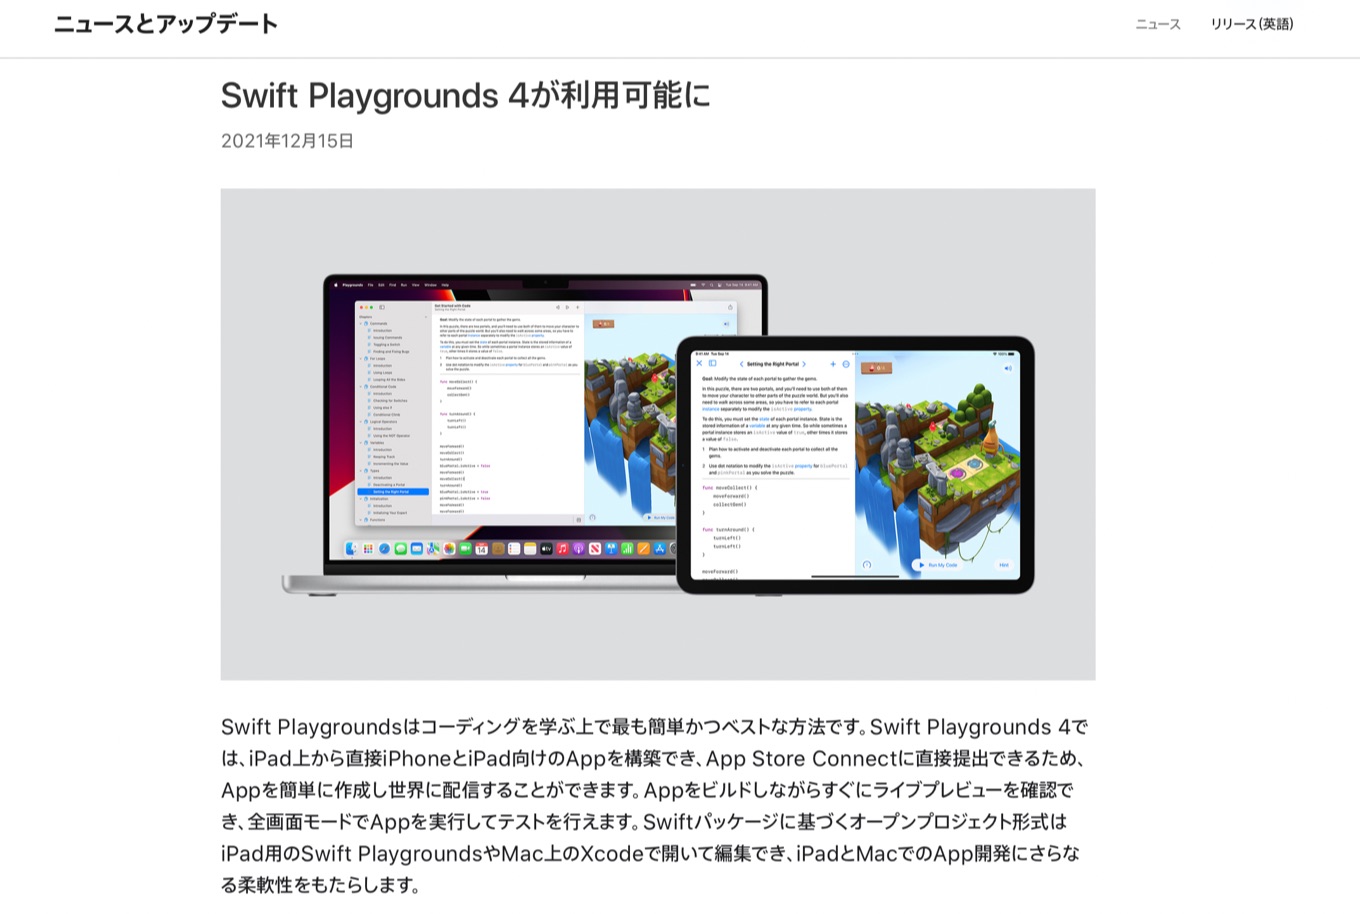 Swift Playgrounds 4 now available